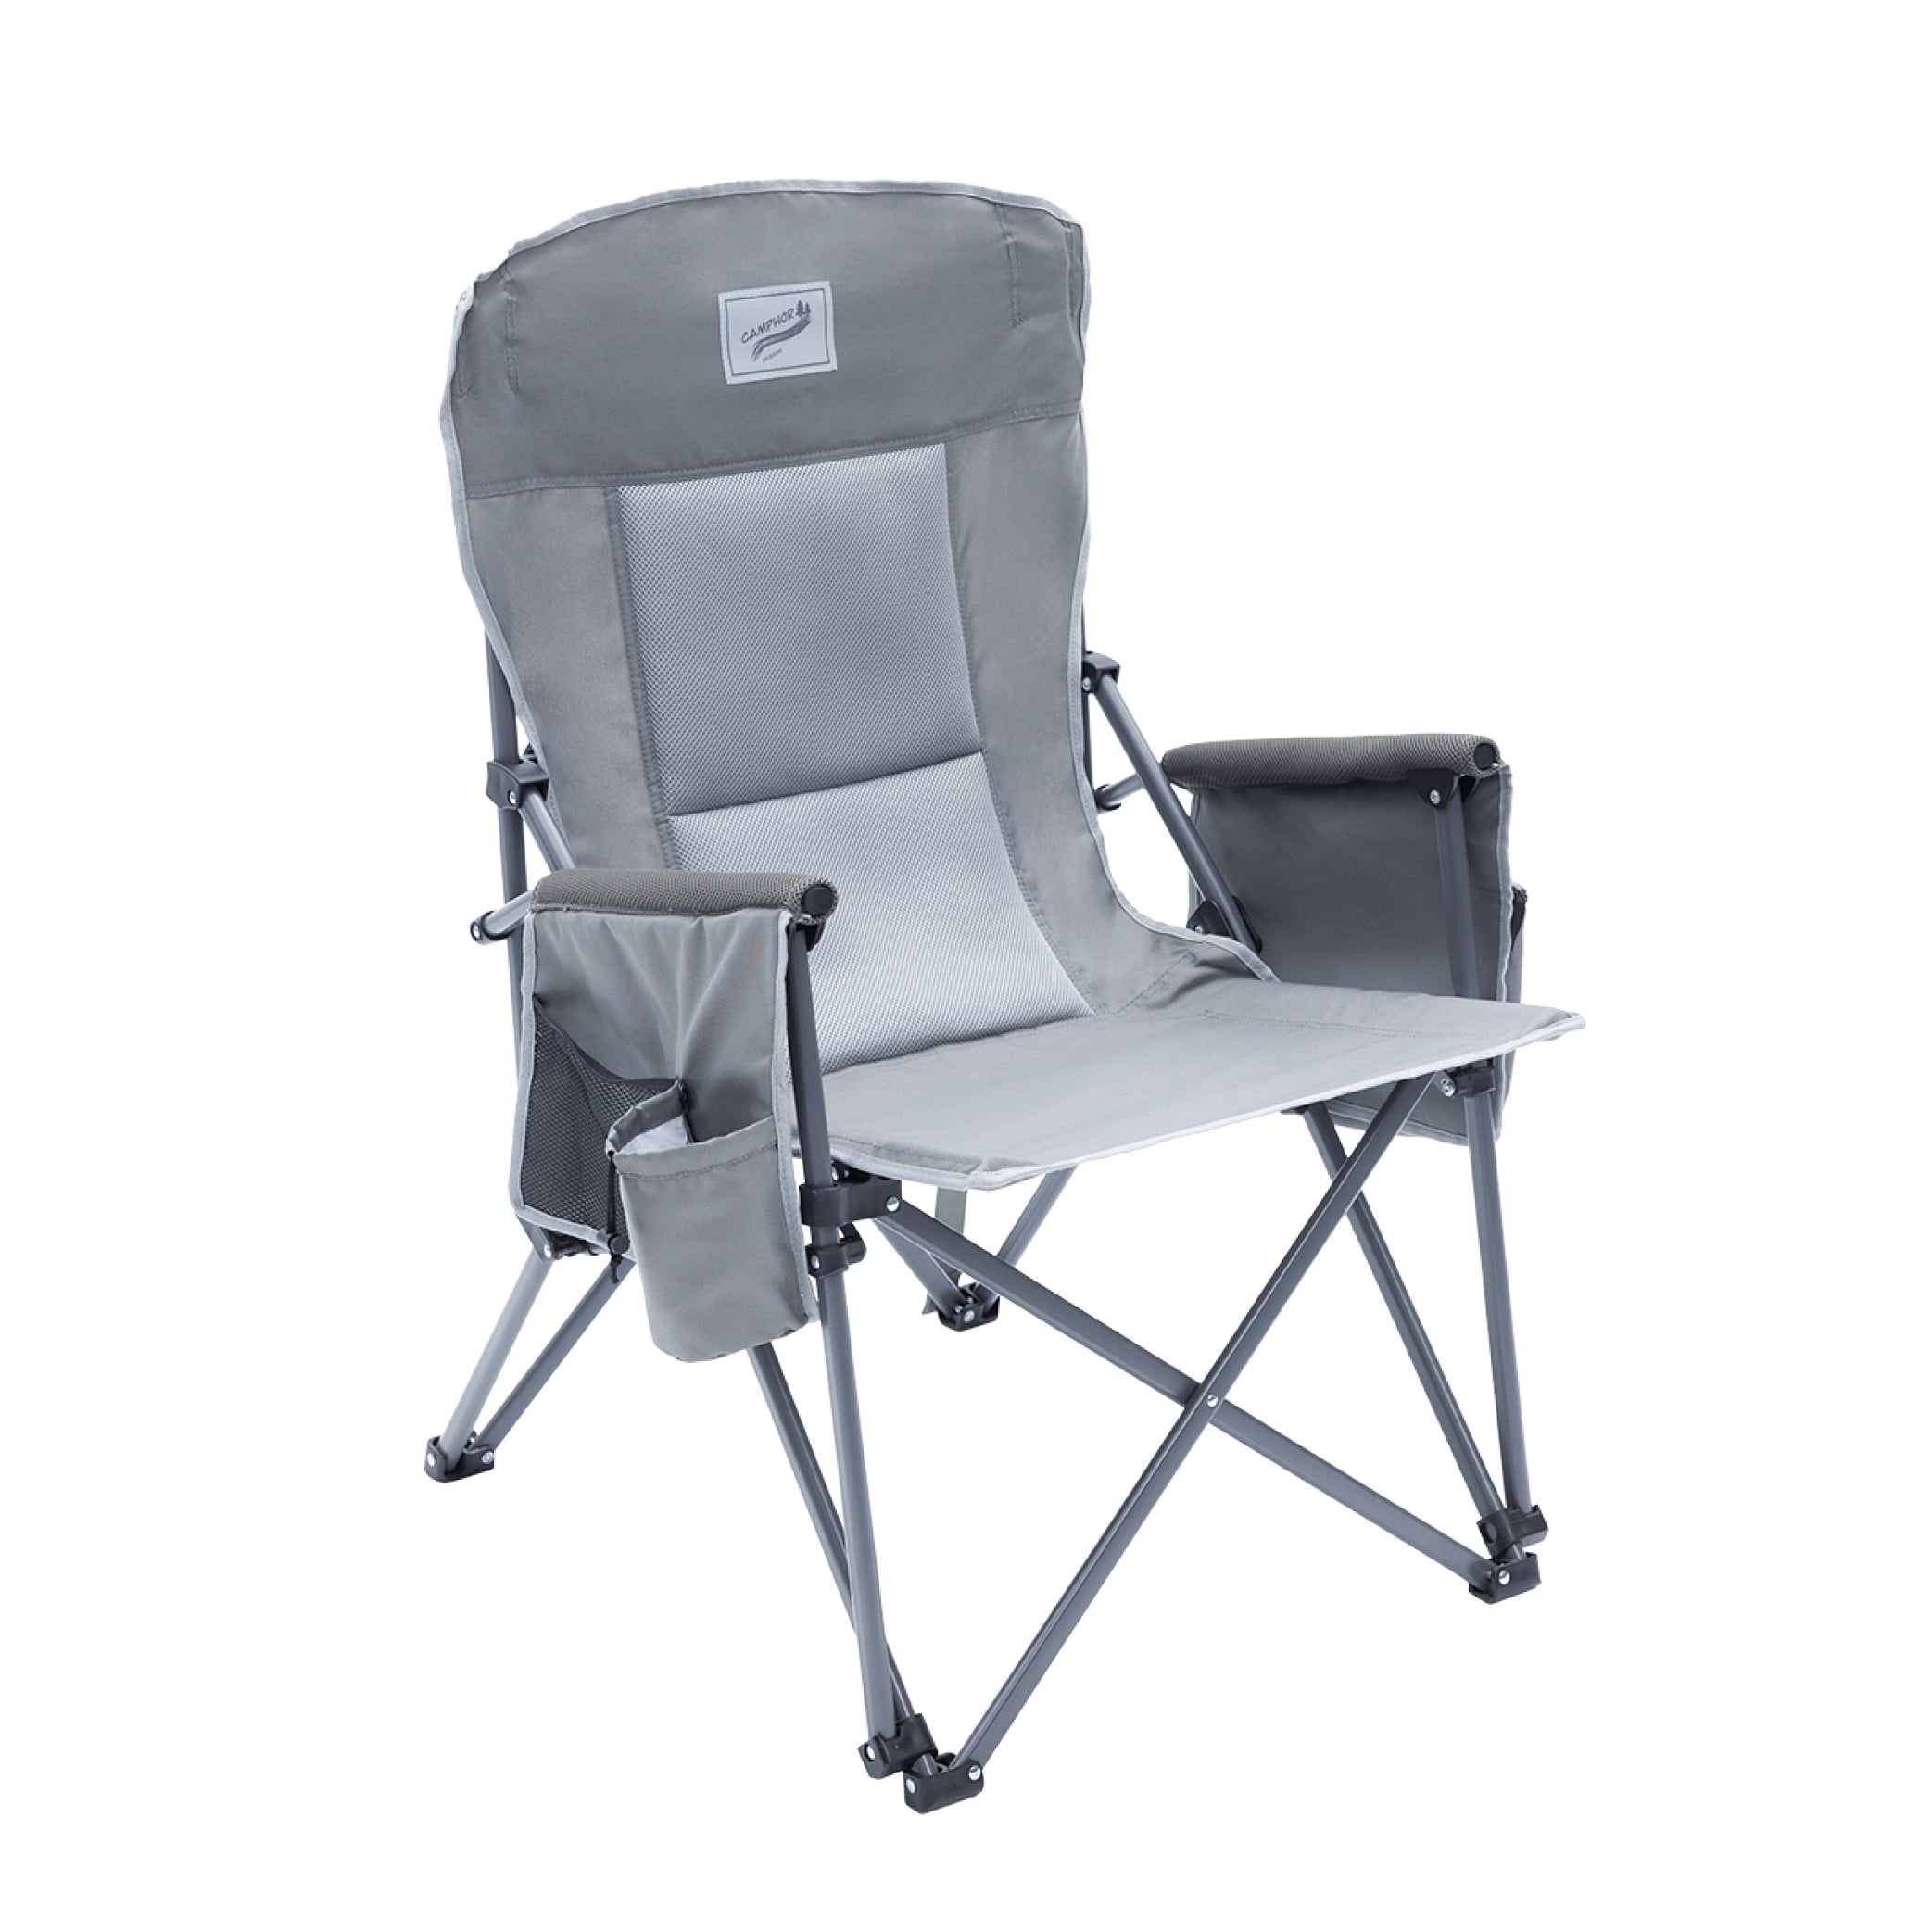 Camping Chair Heavy Duty 600D Portable Folding Chair Outdoor Fishing Hiking  US 